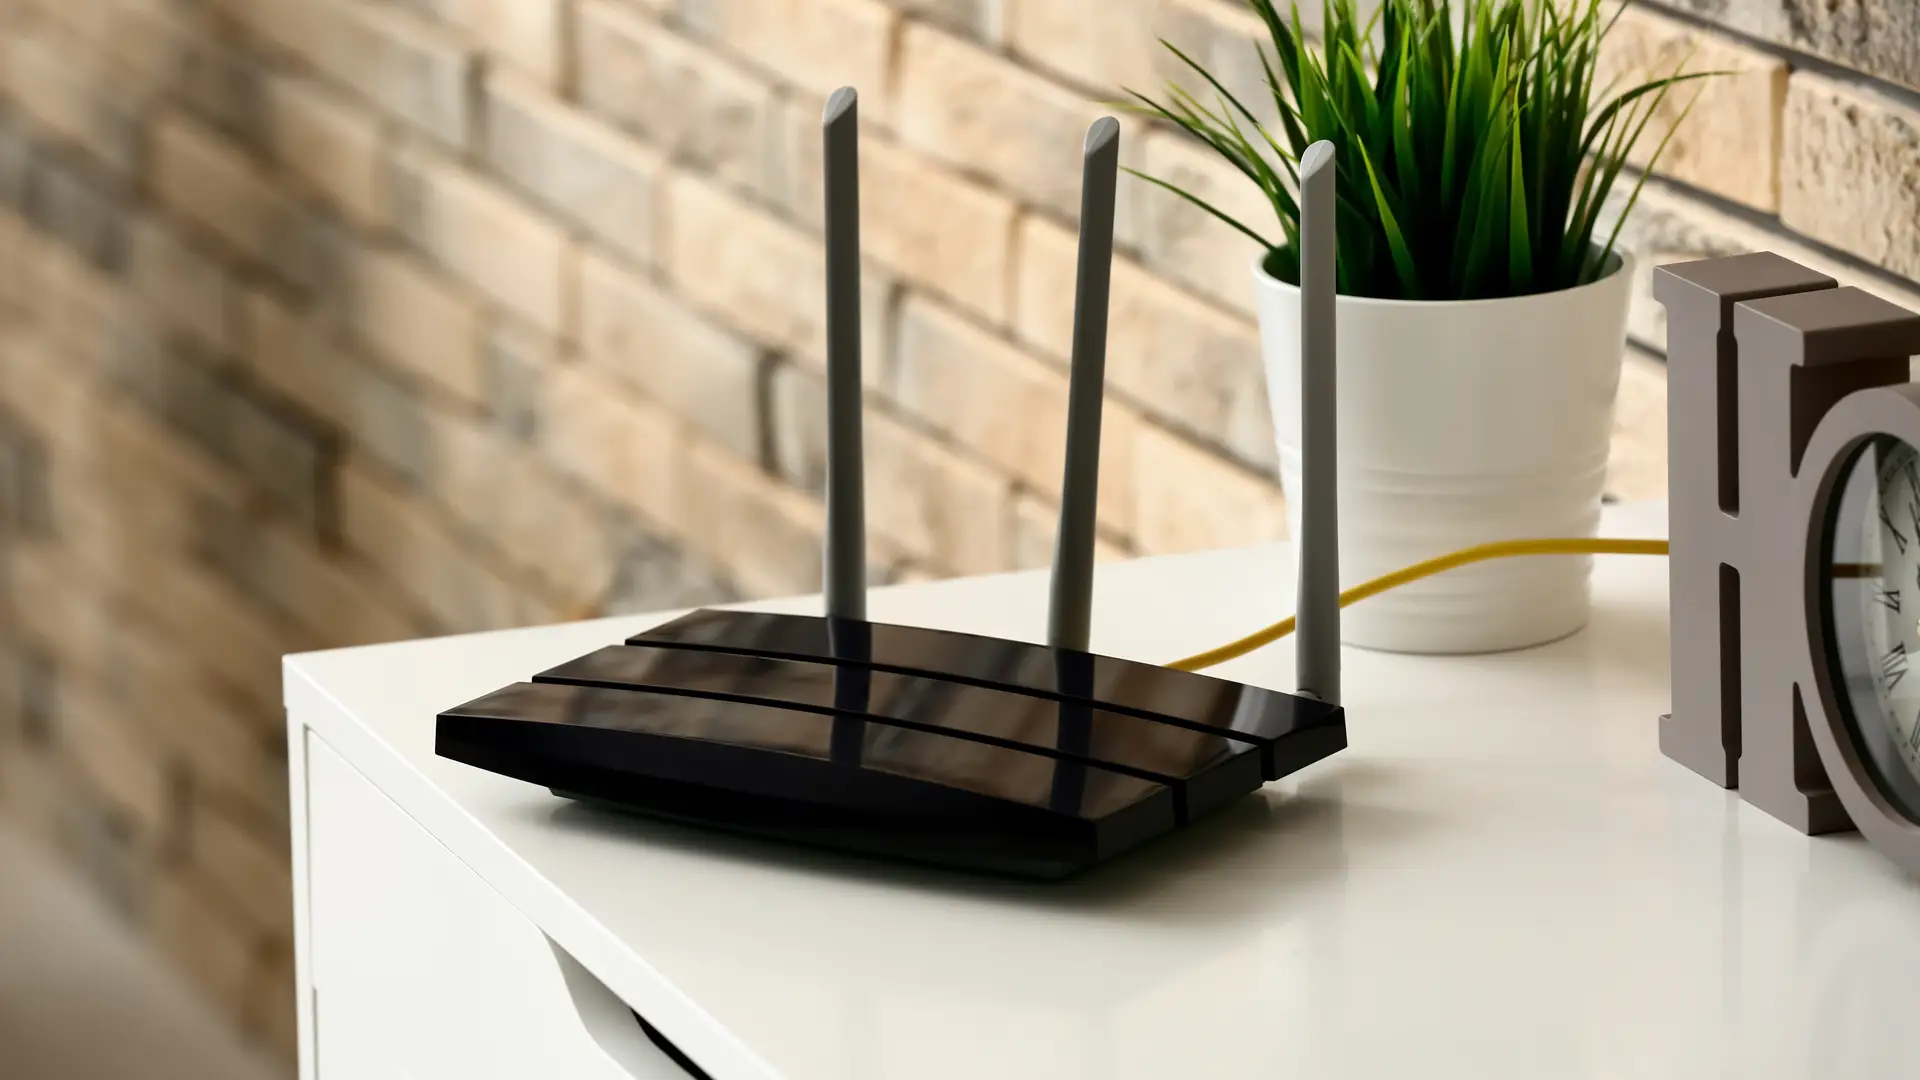 Wifi router that you can acquire with the provider Vodafone